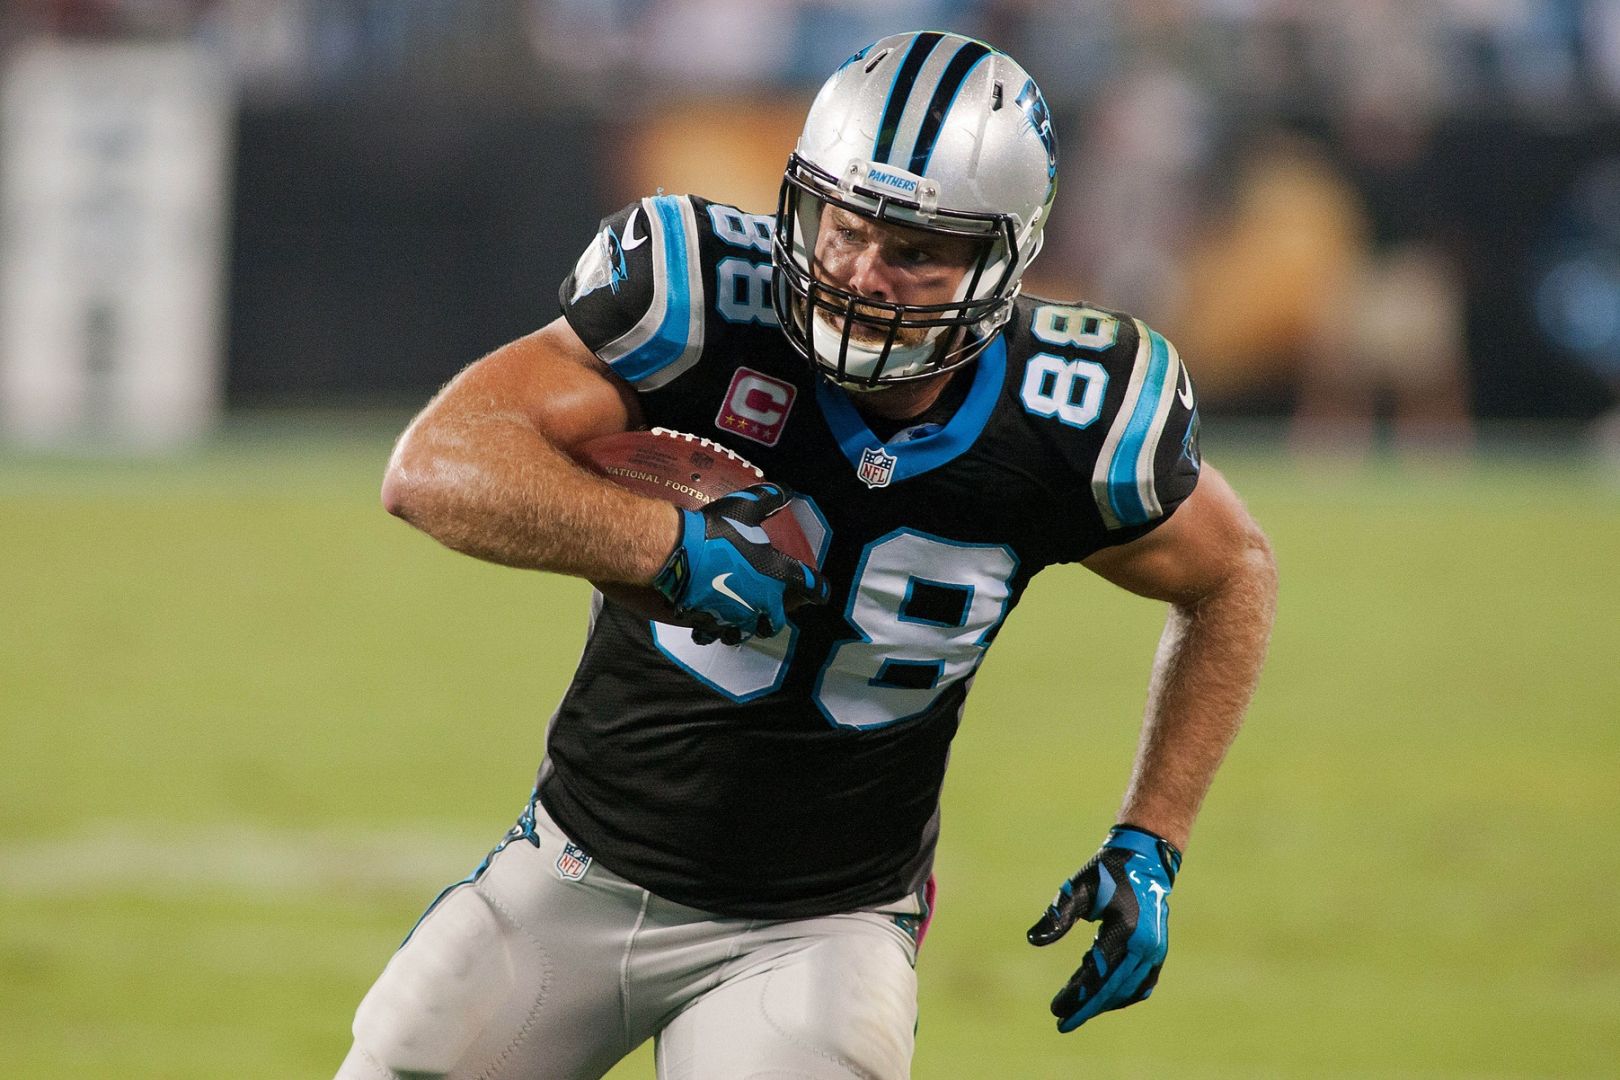 Panthers TE Greg Olsen raises $100,000 for breast cancer research